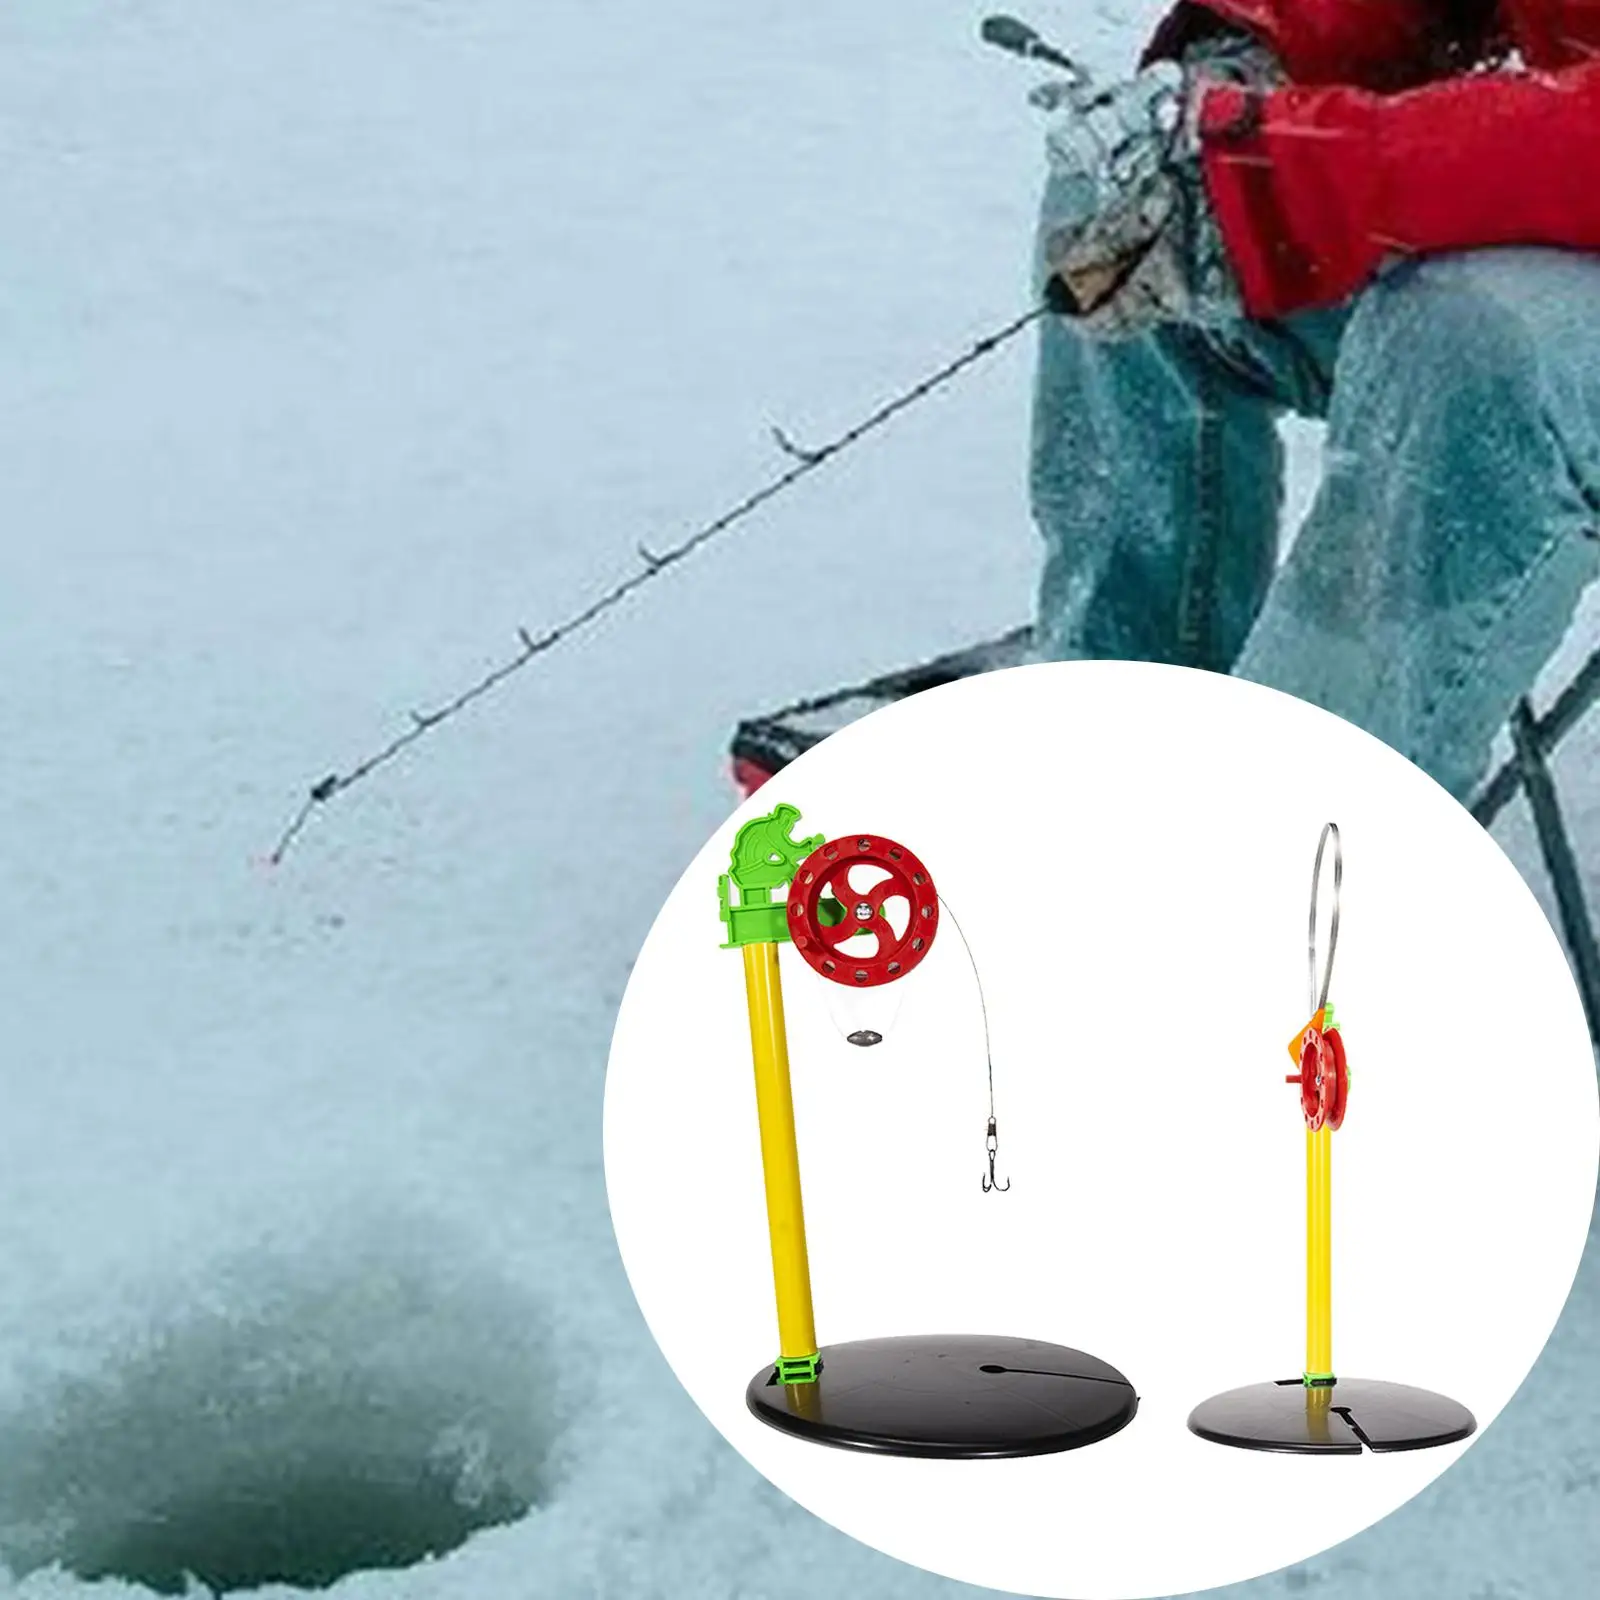 https://ae01.alicdn.com/kf/S483d6be8d53543f9bcbeaea1433d64afV/2x-Durable-Ice-Fishing-Rod-with-Marker-Flag-Pole-Resistant-Compact-2Pcs-Winter-for-Fishing-Tackle.jpg